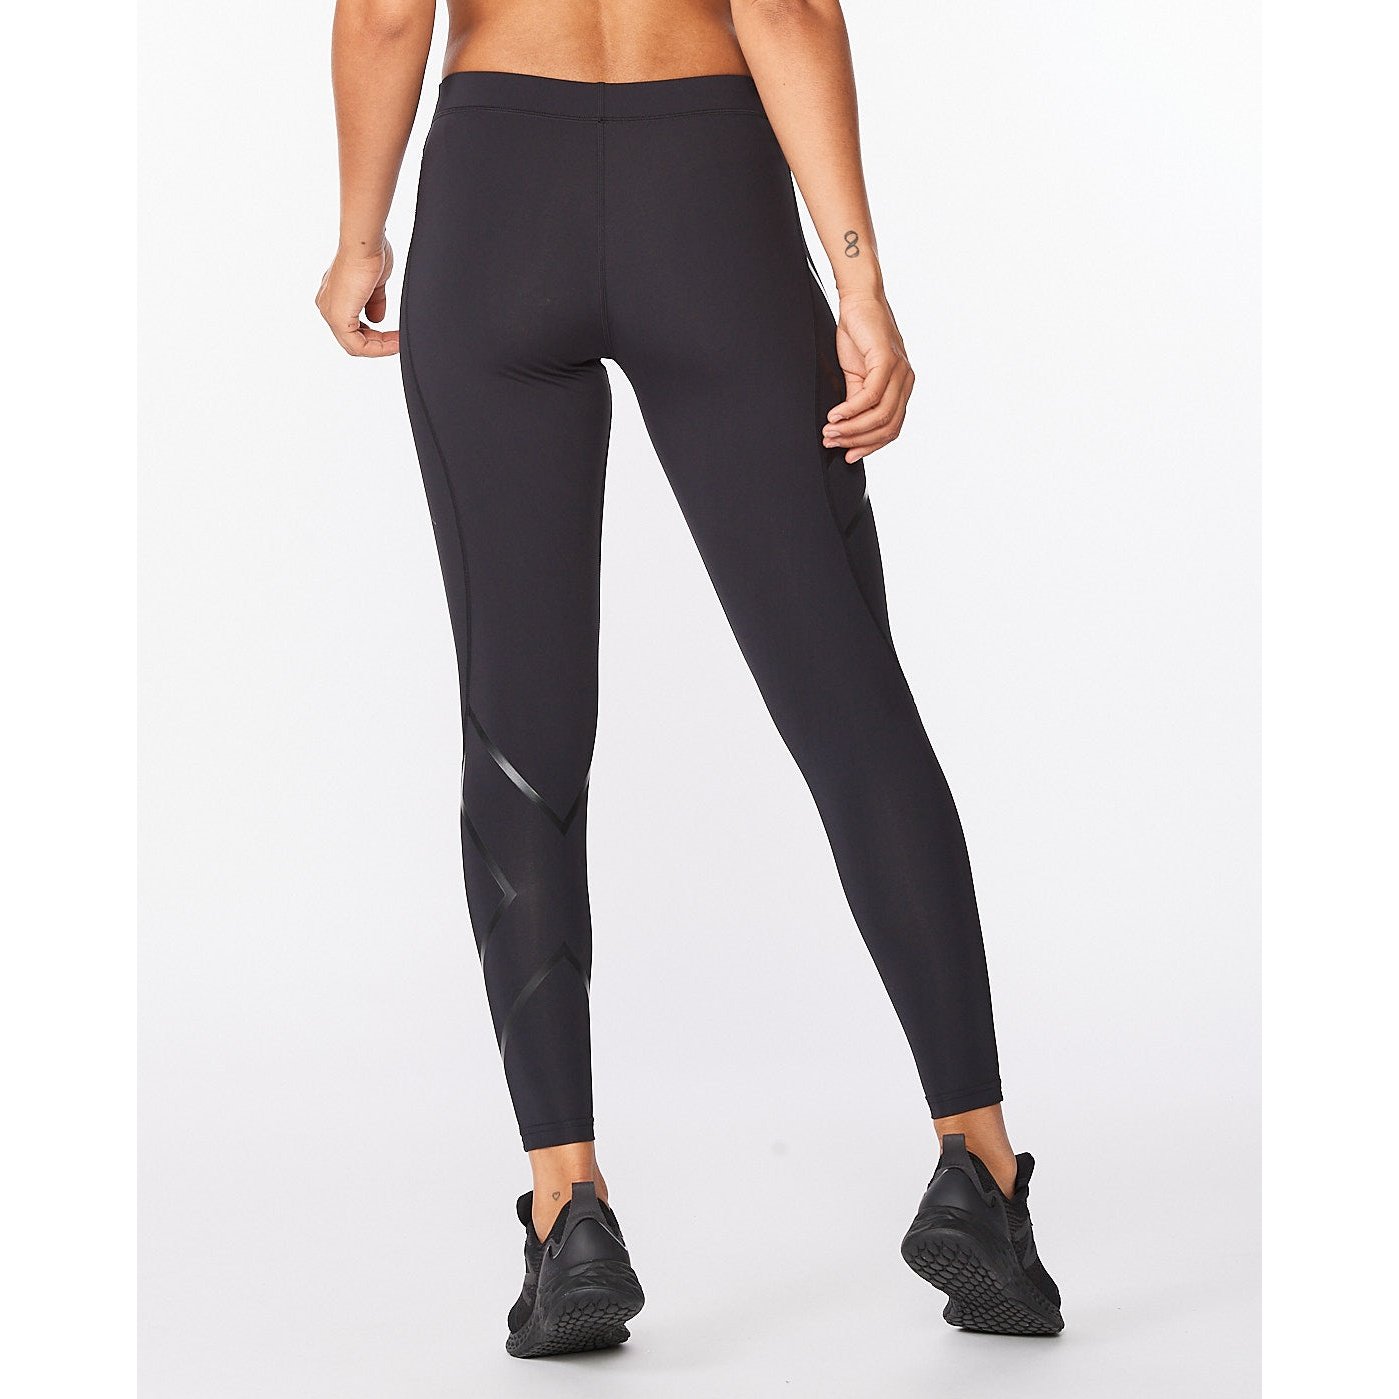 2XU THERMAL COMPRESSION TIGHTS - Mike's Bike Shop